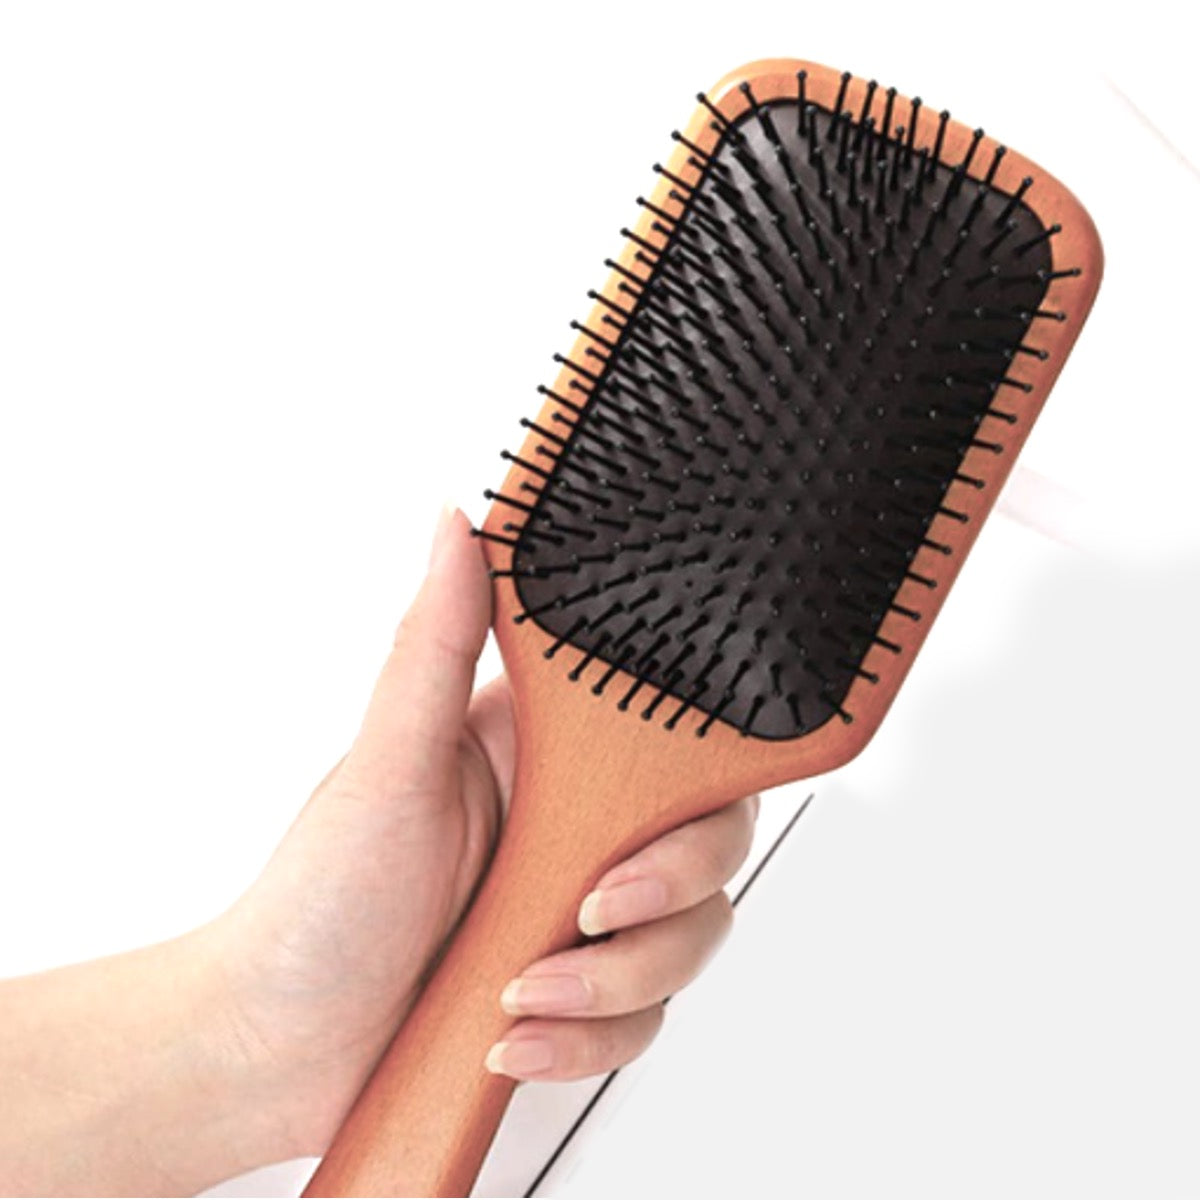 Wood Hair Brush  Organic shampoo, salon approved, plant-based,  family-owned